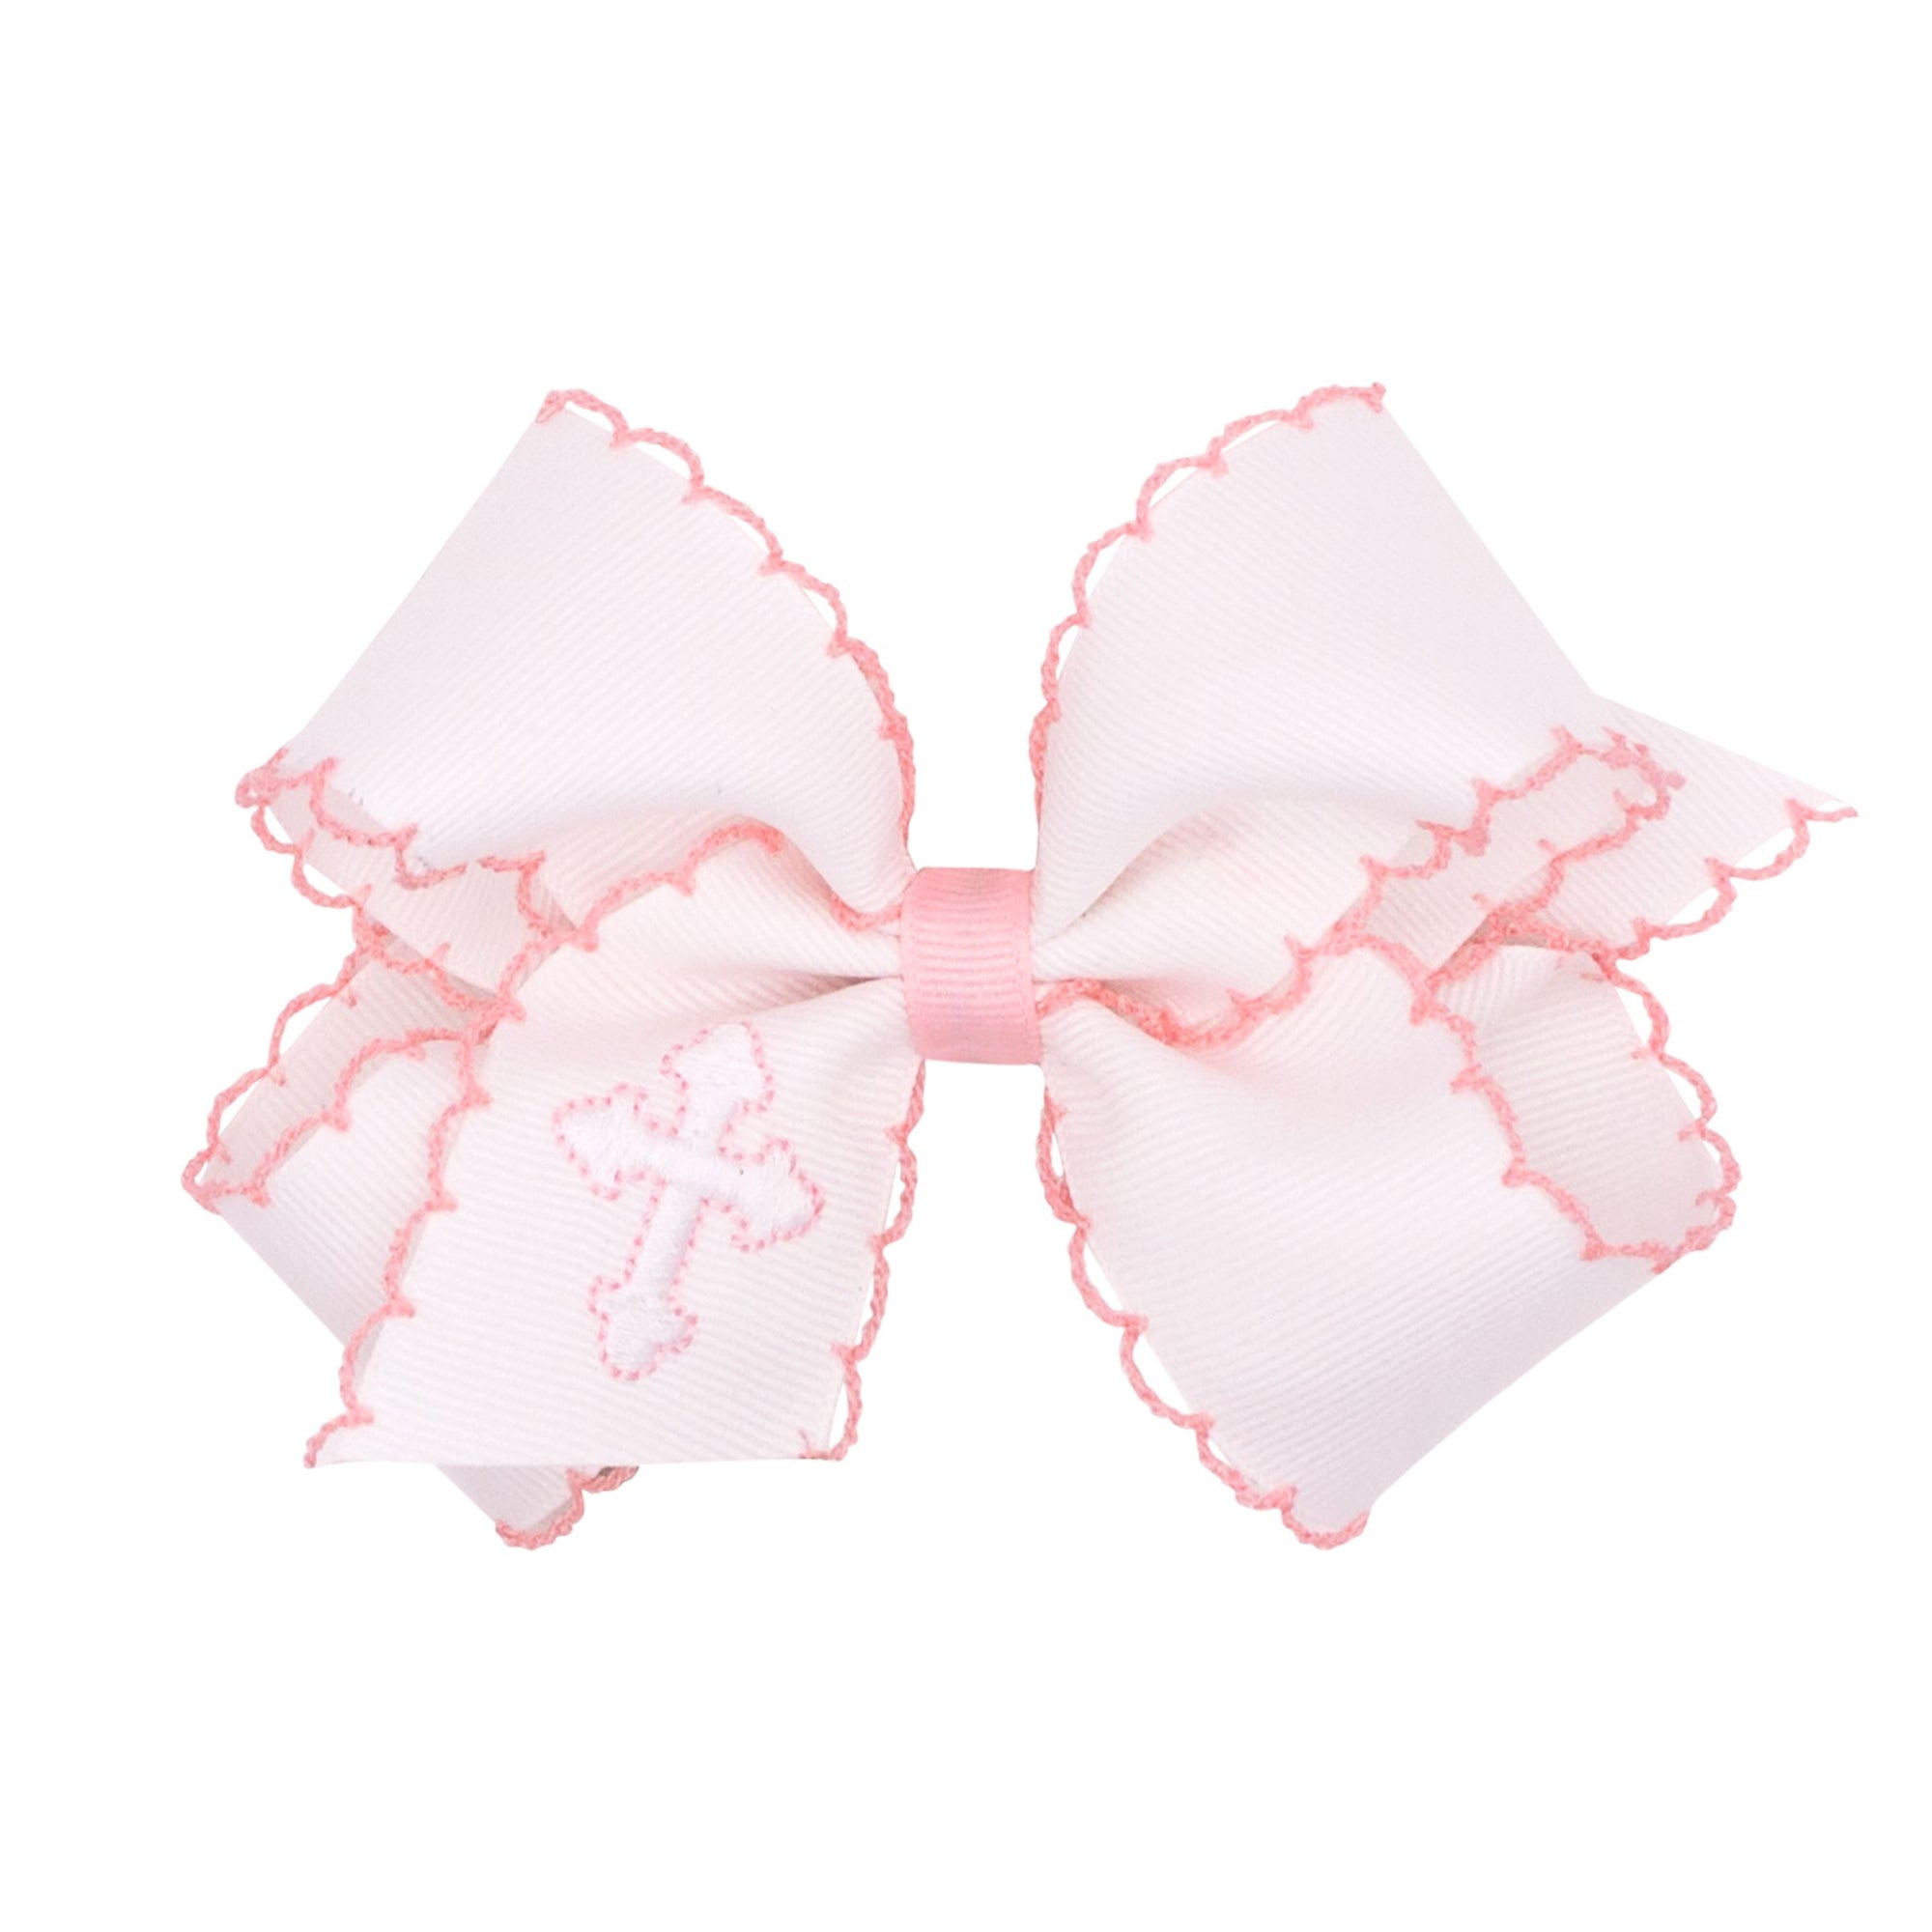 Grosgrain Bow with Moonstitch Edge and White Cross Embroidery | Light Pink